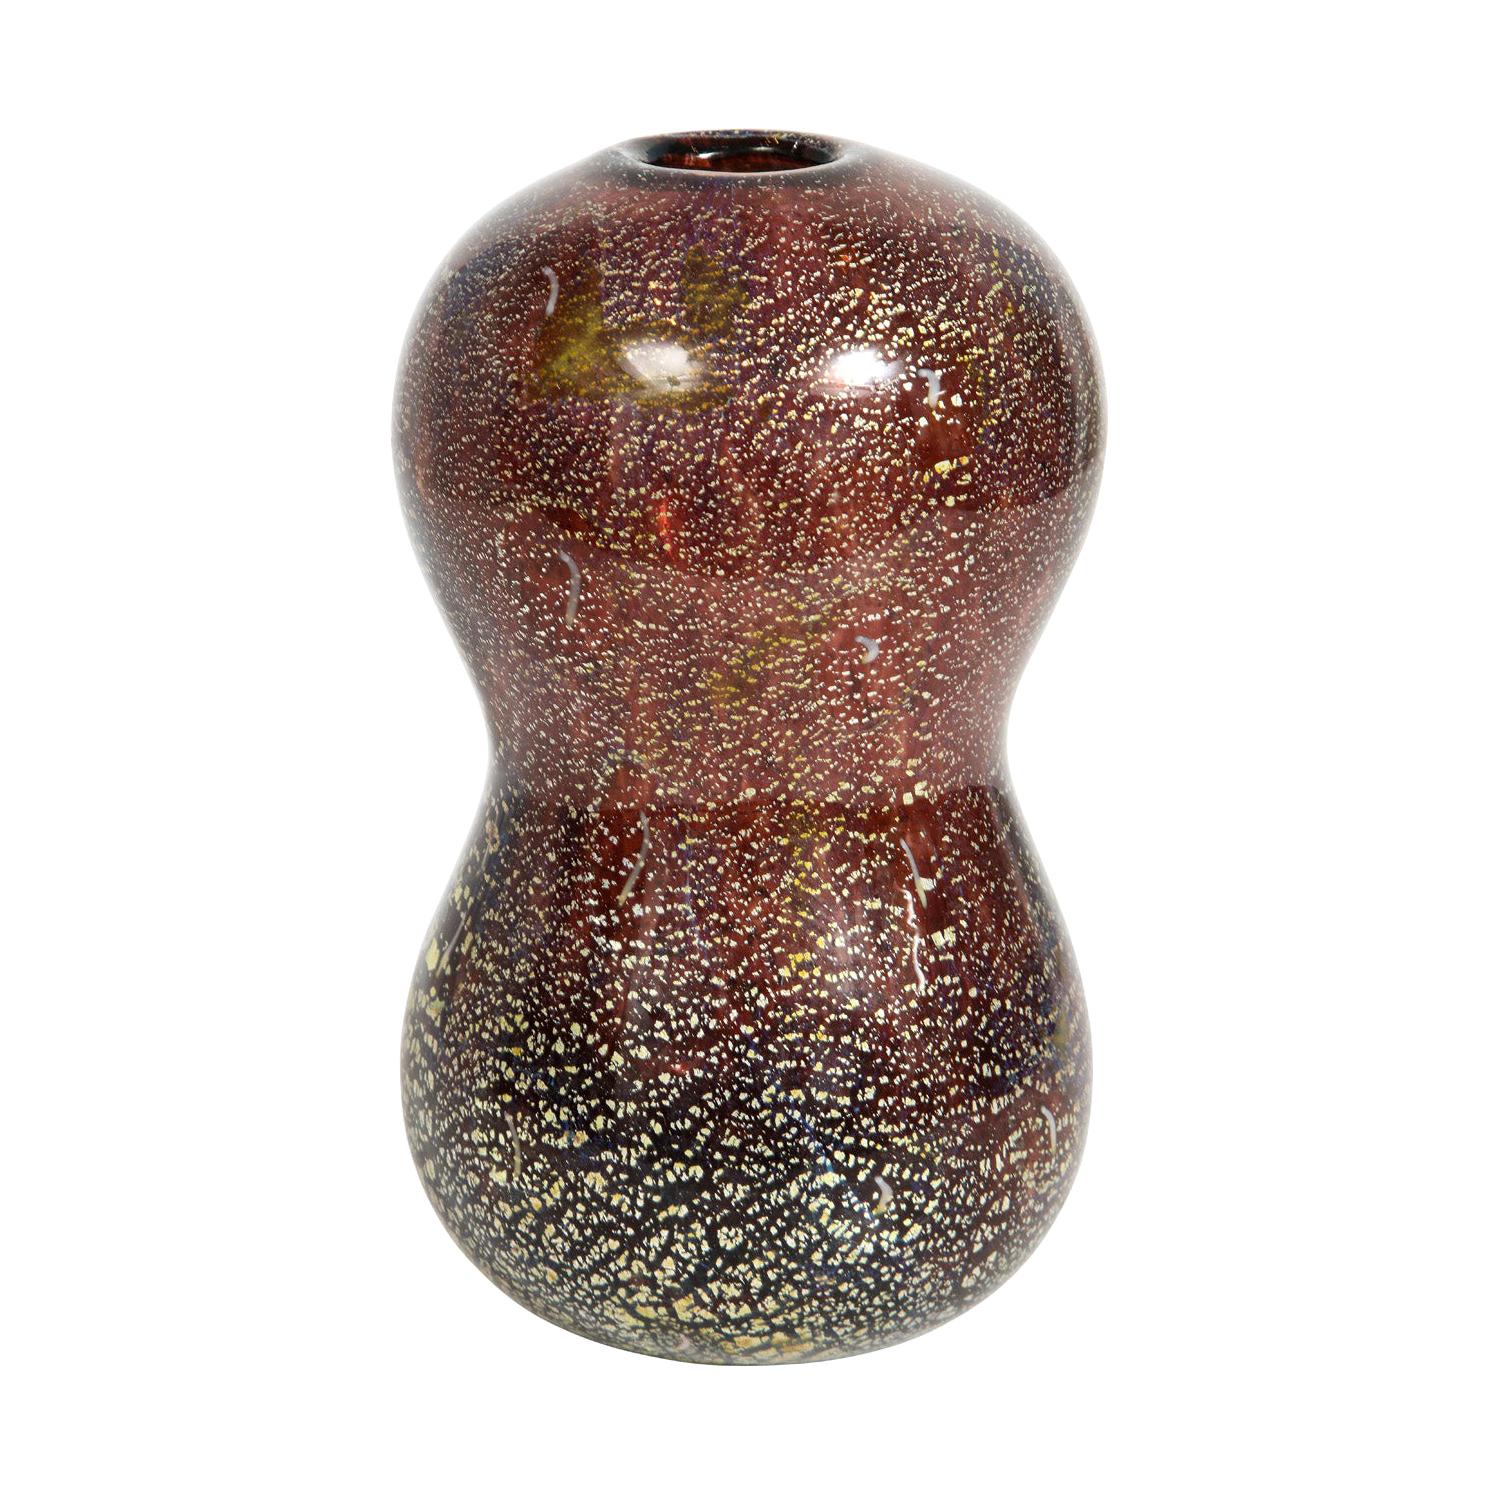 Giulio Radi Vase with Gold Foil and Murrhines, ca 1950 For Sale